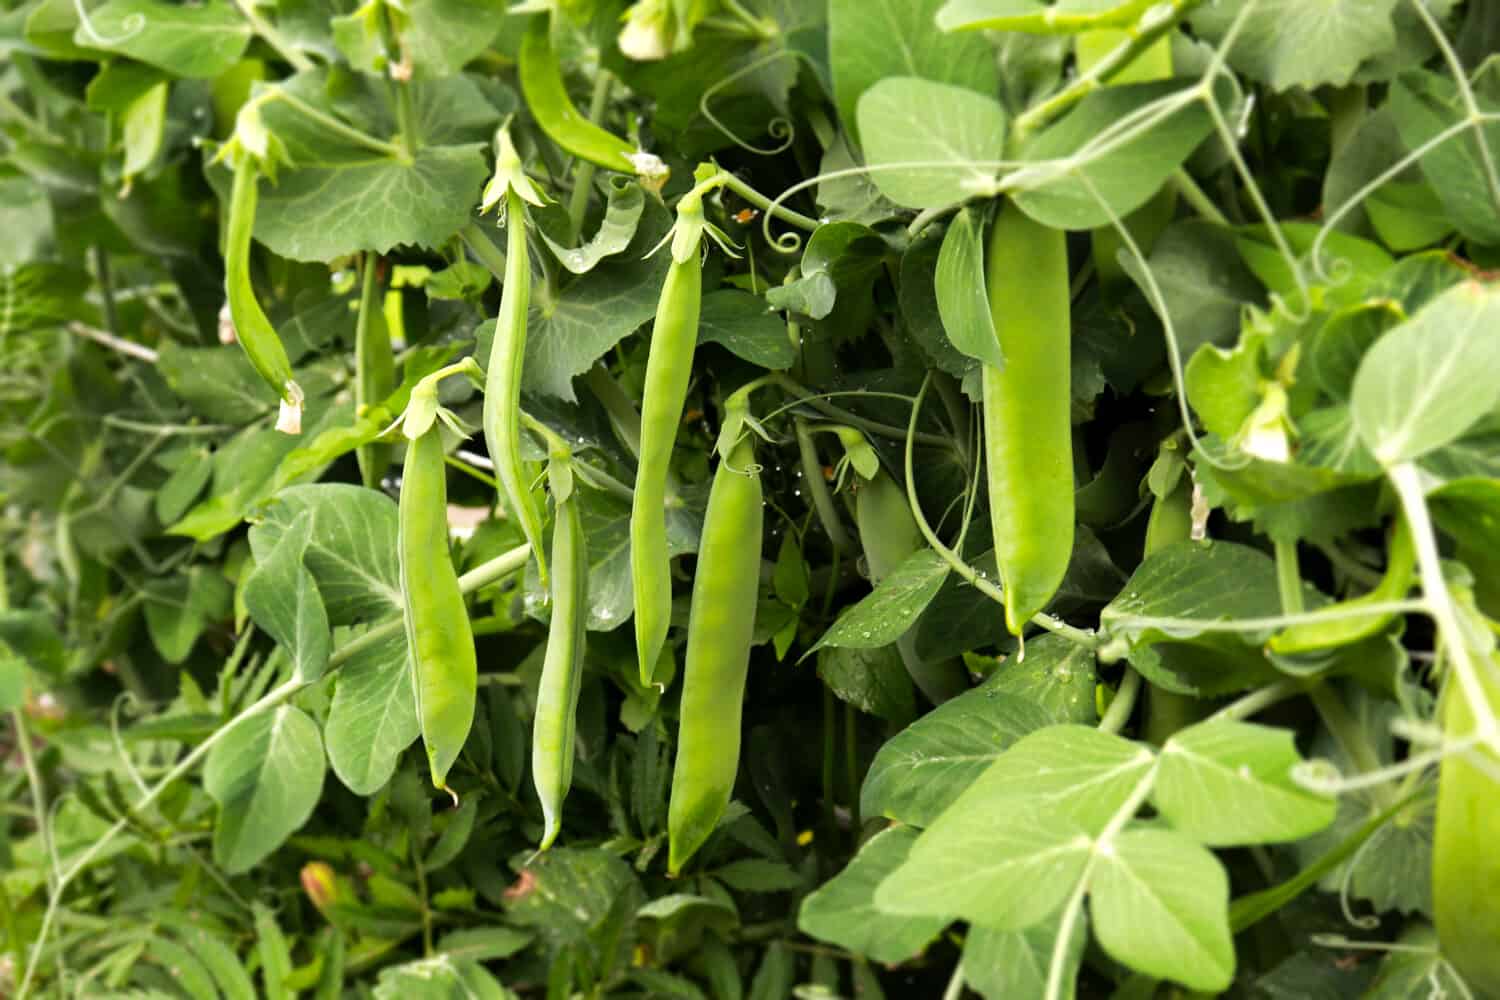 Green peas grow in the garden. Beautiful close up of green fresh peas and pea pods. Healthy food. Selective focus on fresh bright green pea pods on a pea plants in a garden. Growing peas outdoors and 